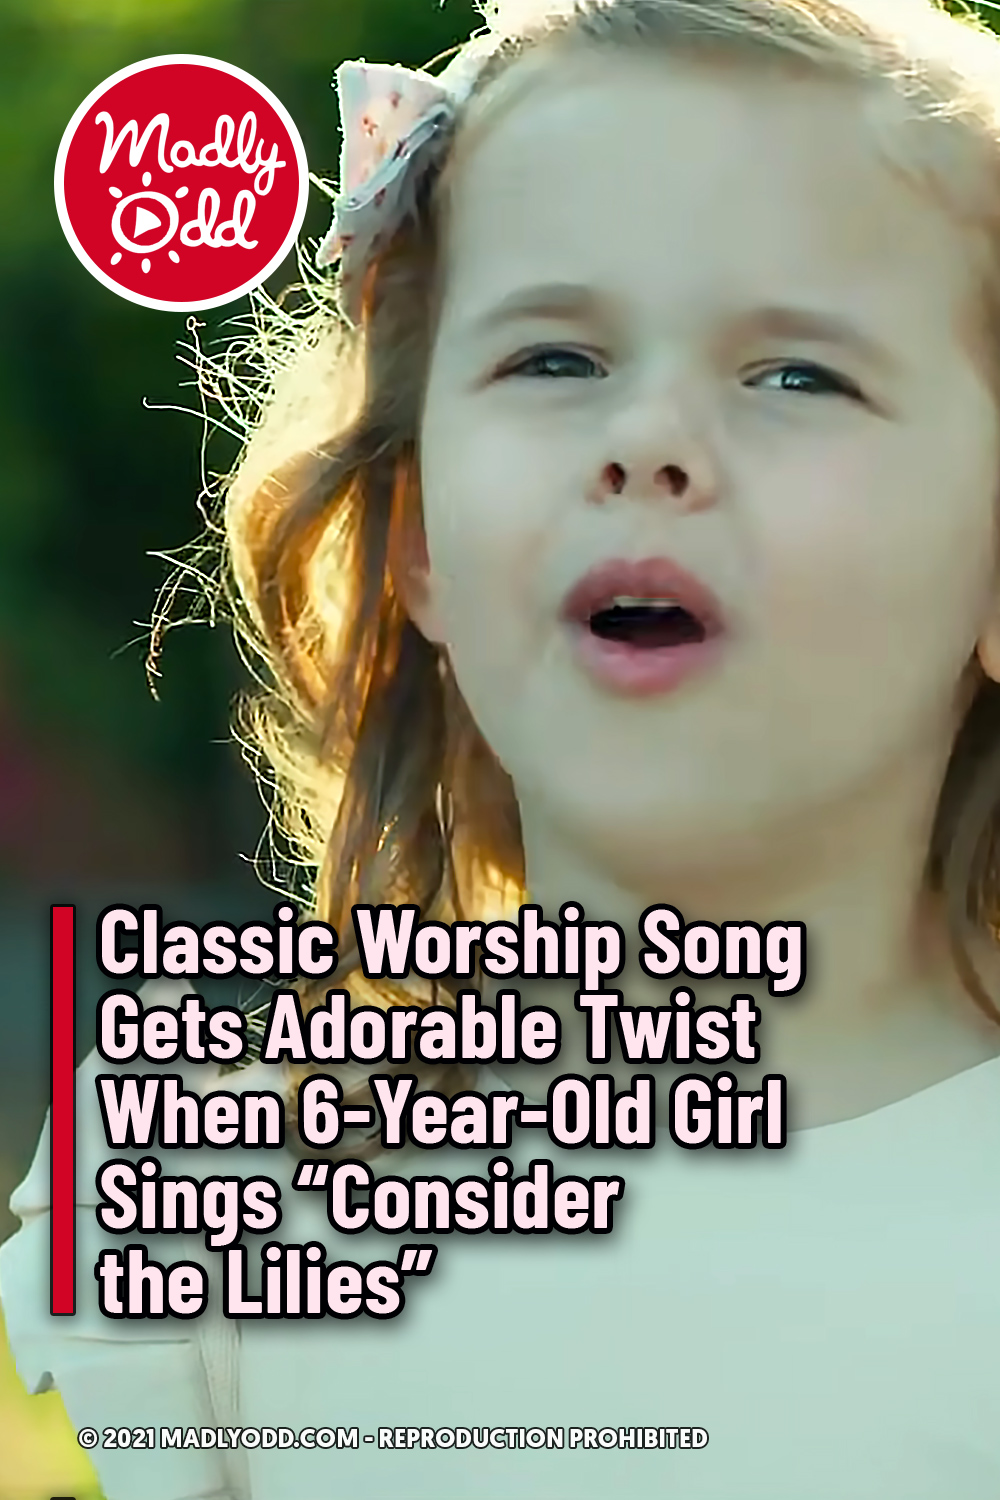 Classic Worship Song Gets Adorable Twist When 6-Year-Old Girl Sings “Consider the Lilies”